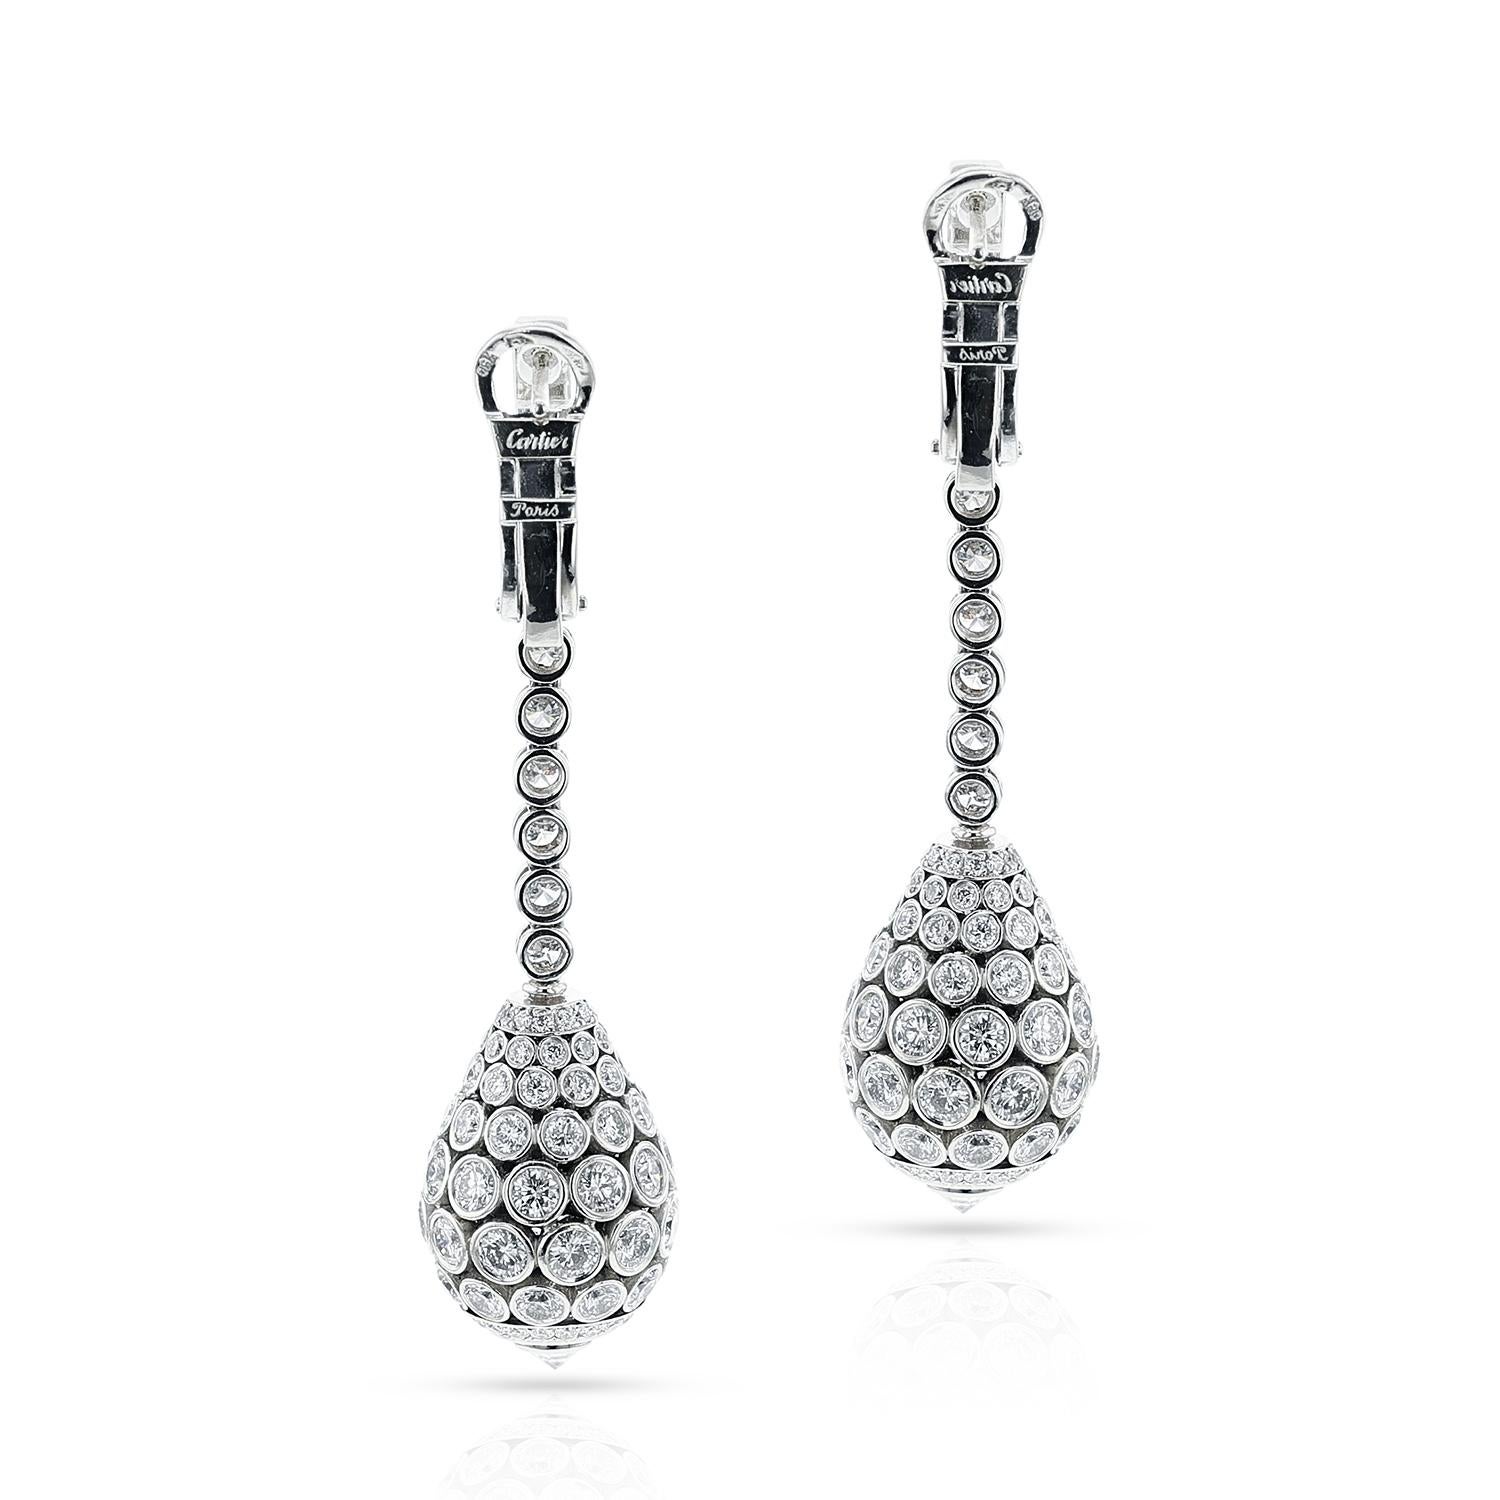 SKU 1153

A pair of French Cartier Diamond Dangling Drop Earrings made in 18 karat white gold. The total diamond weight is appx. 15 carats. The total length of the earring is 2.35 inches. The total weight of the earring is 22.06 grams. 